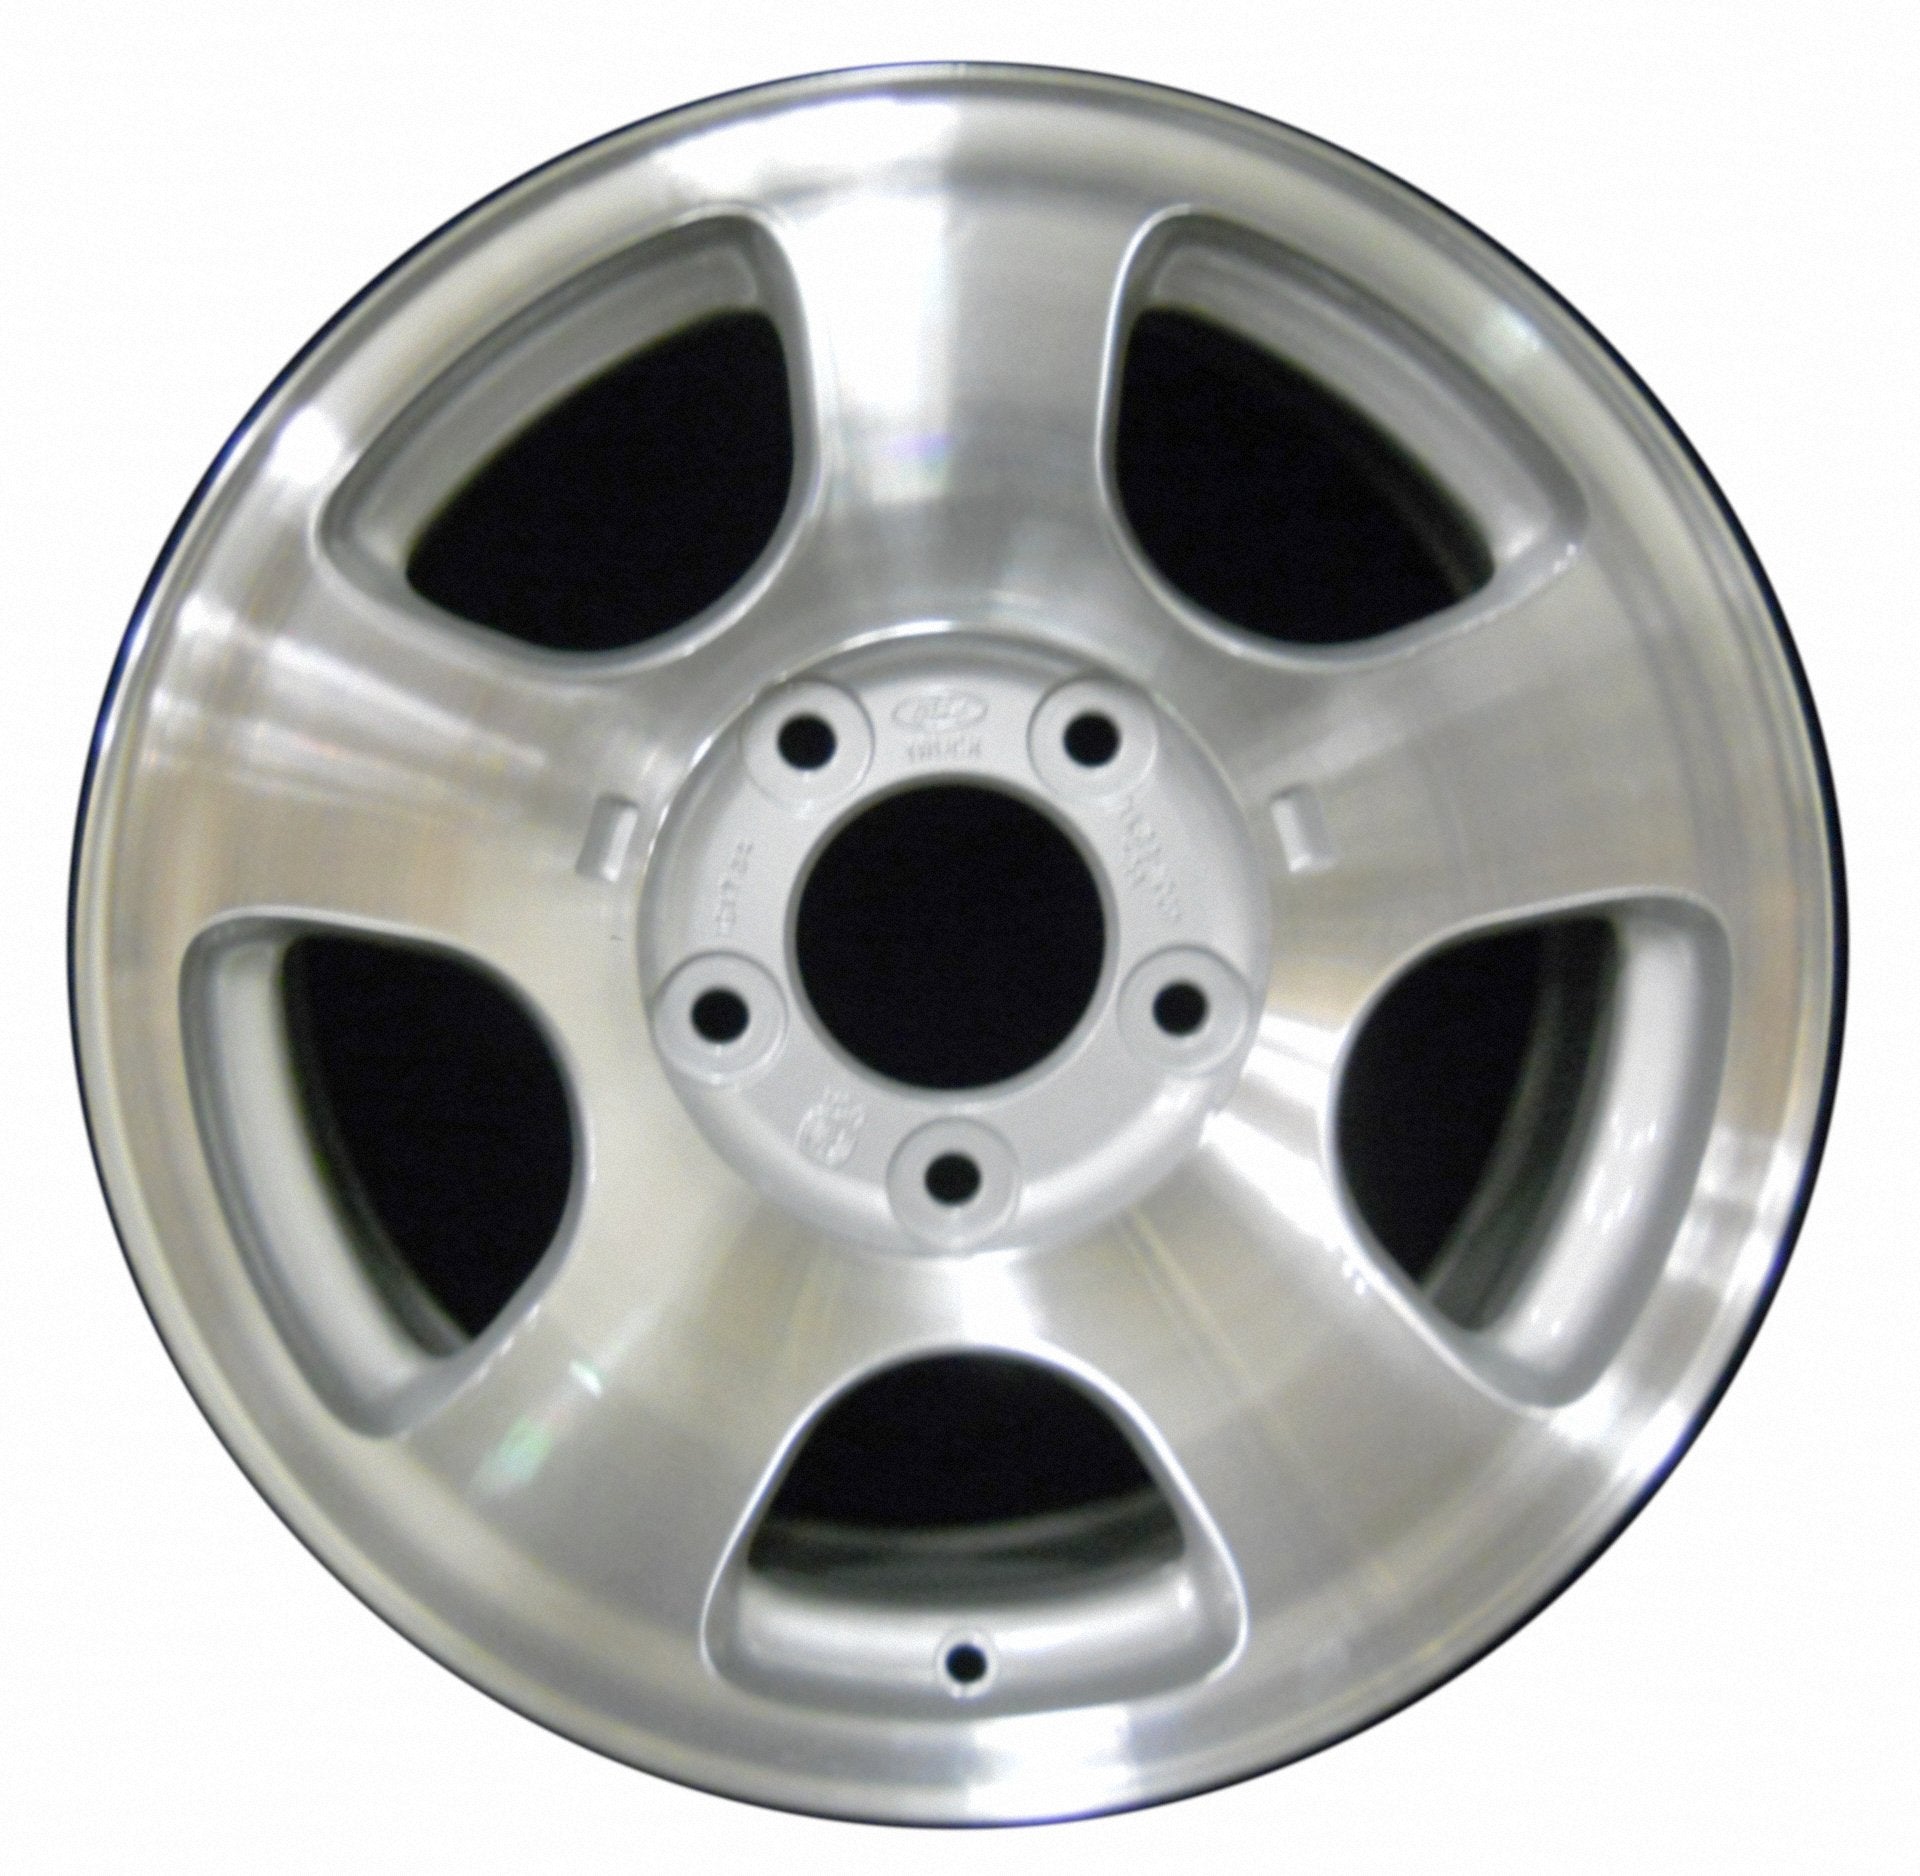 Ford F150 Truck  2000, 2001, 2002 Factory OEM Car Wheel Size 16x7 Alloy WAO.3400.PS02.MA